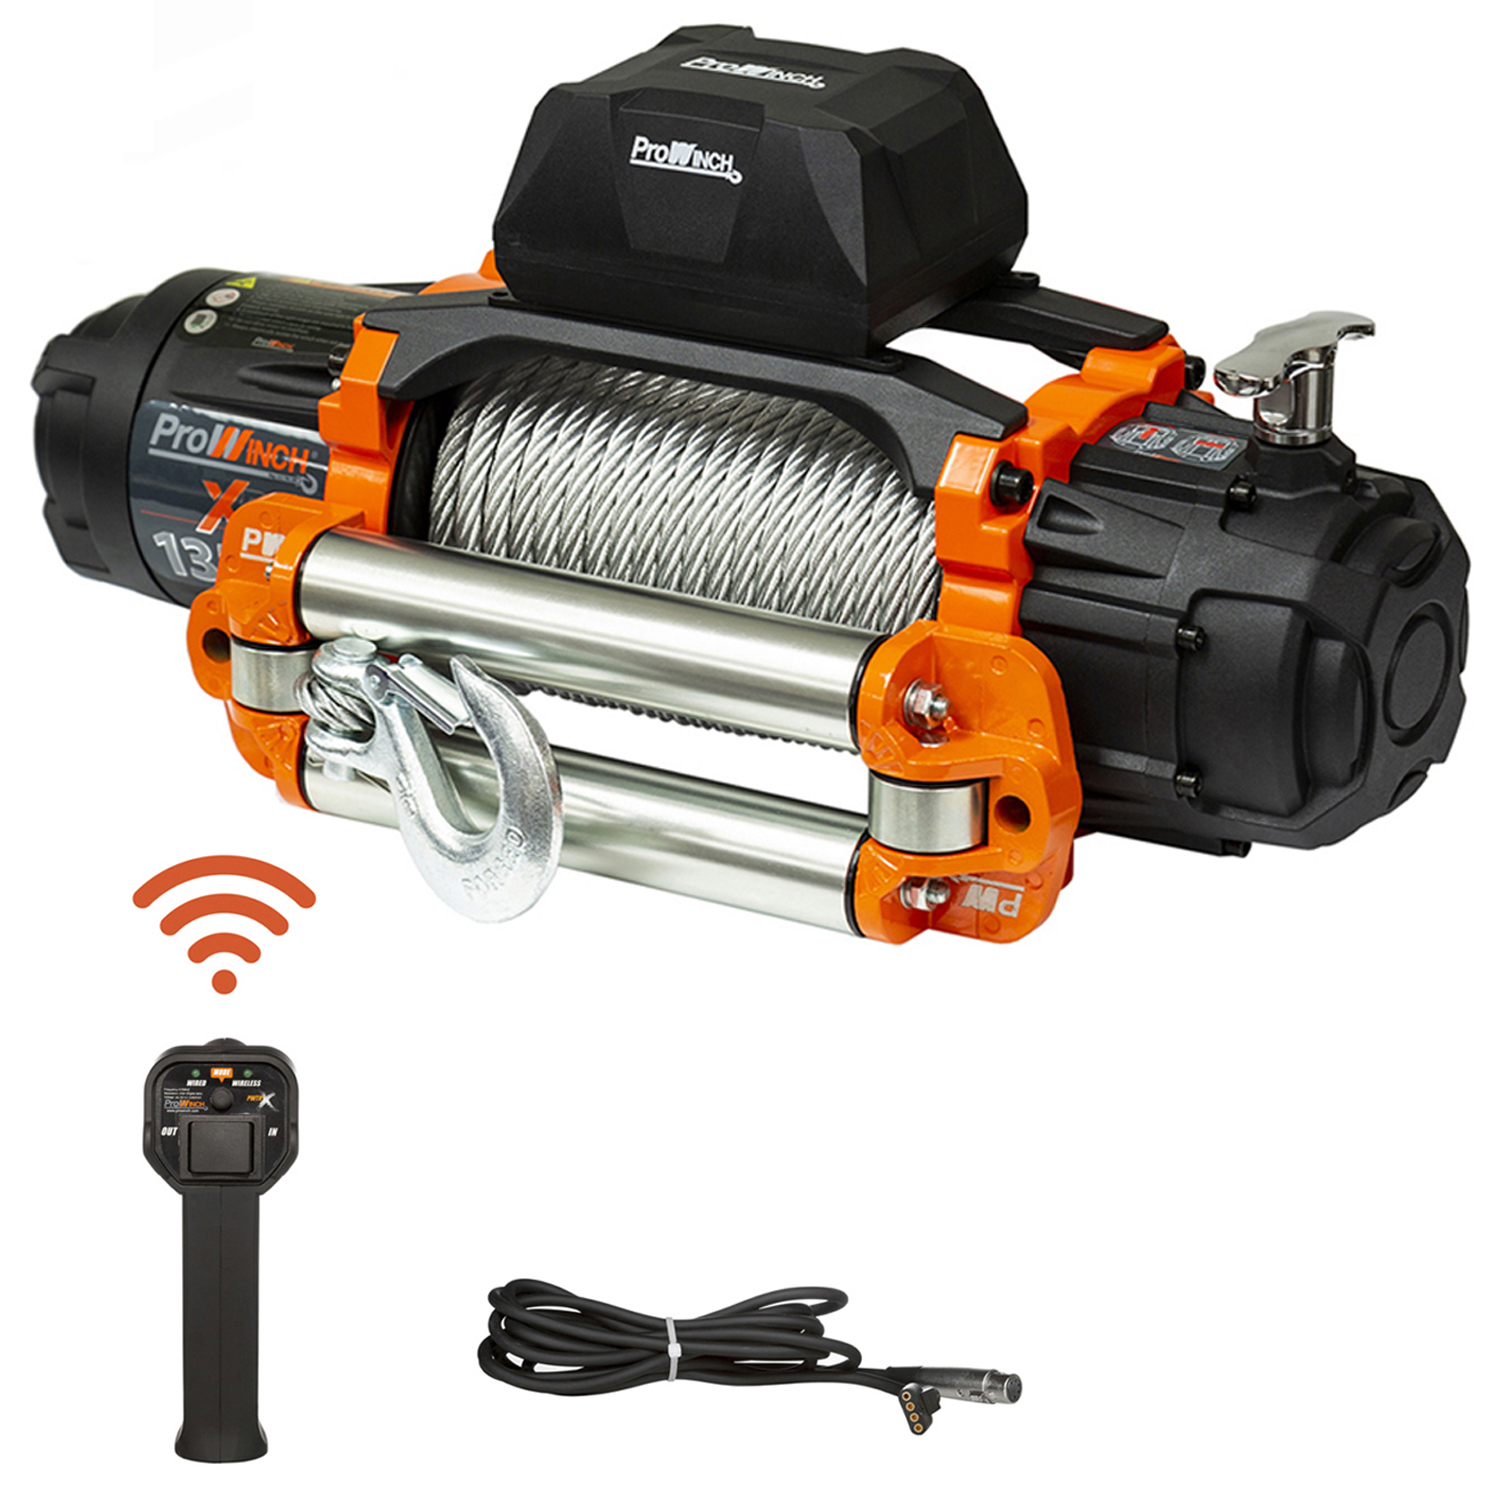 Prowinch 13500 lb Load Capacity Electric Winch Waterproof with Wireless Remote Control System 24V